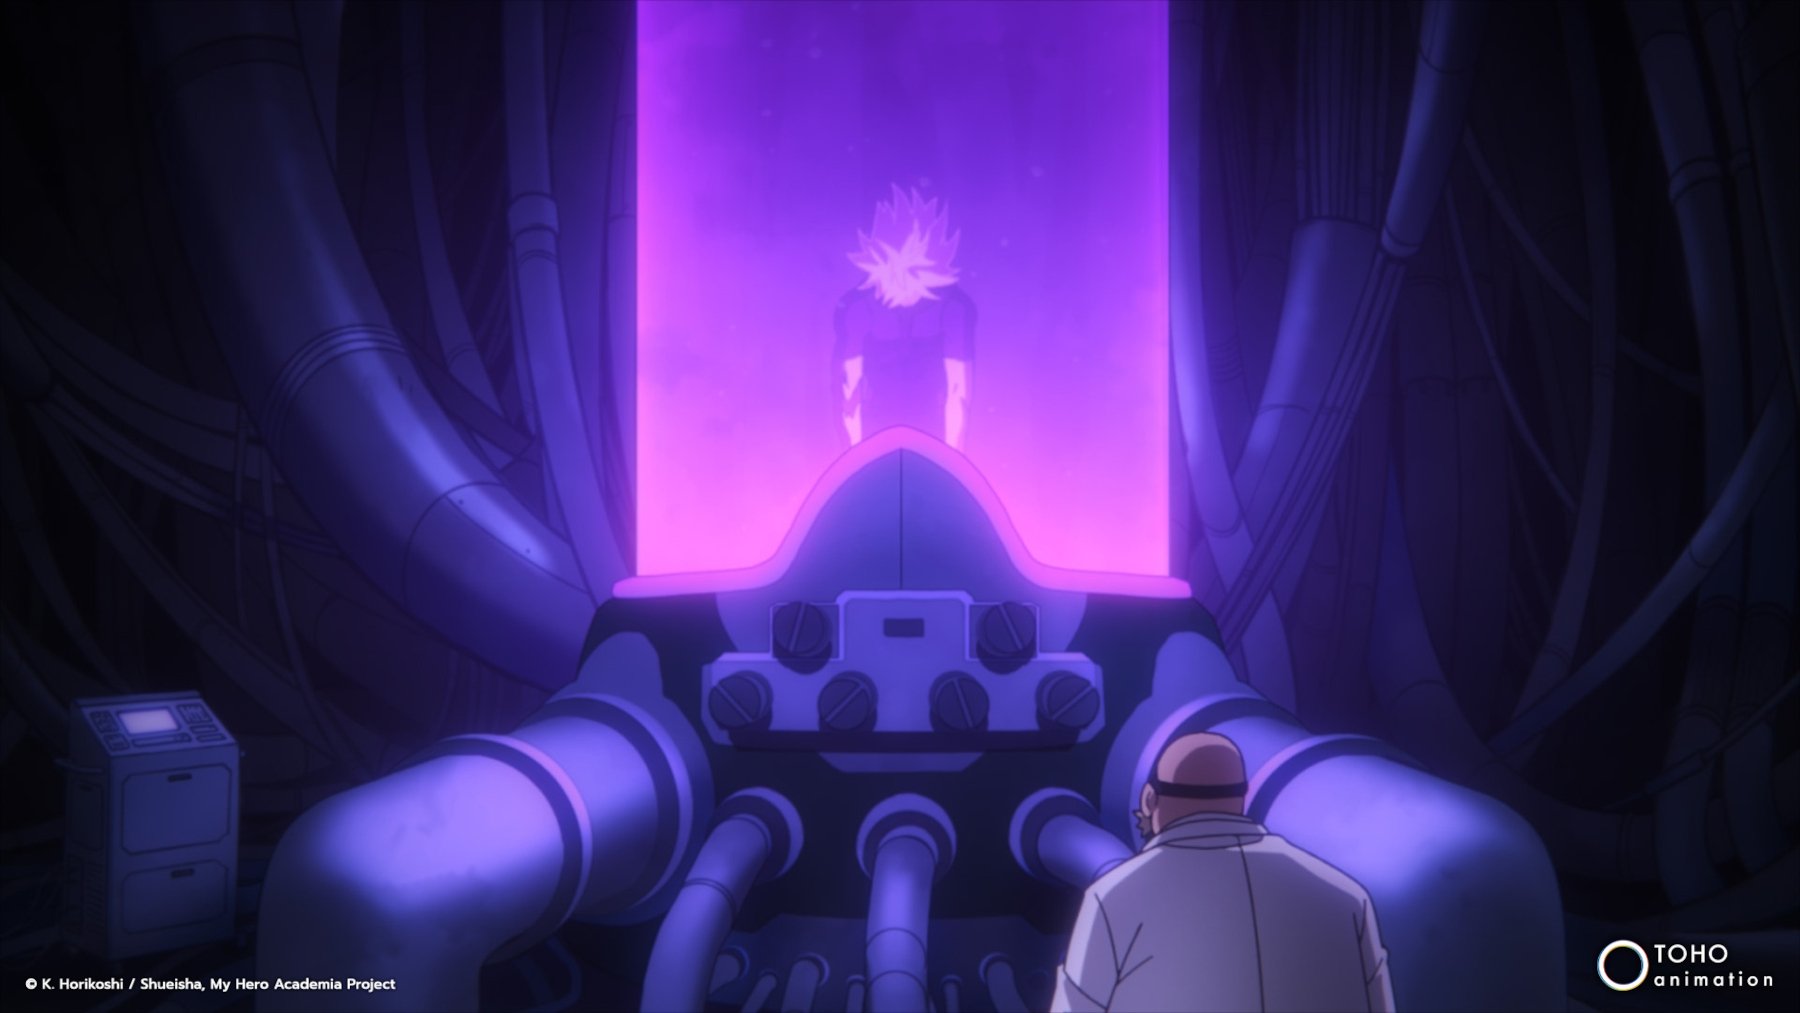 Shigaraki in 'My Hero Academia' Season 6 for our article about the ending of episode 4. He's in a purple incubator tube and Kyudai Garaki is standing in front of it.